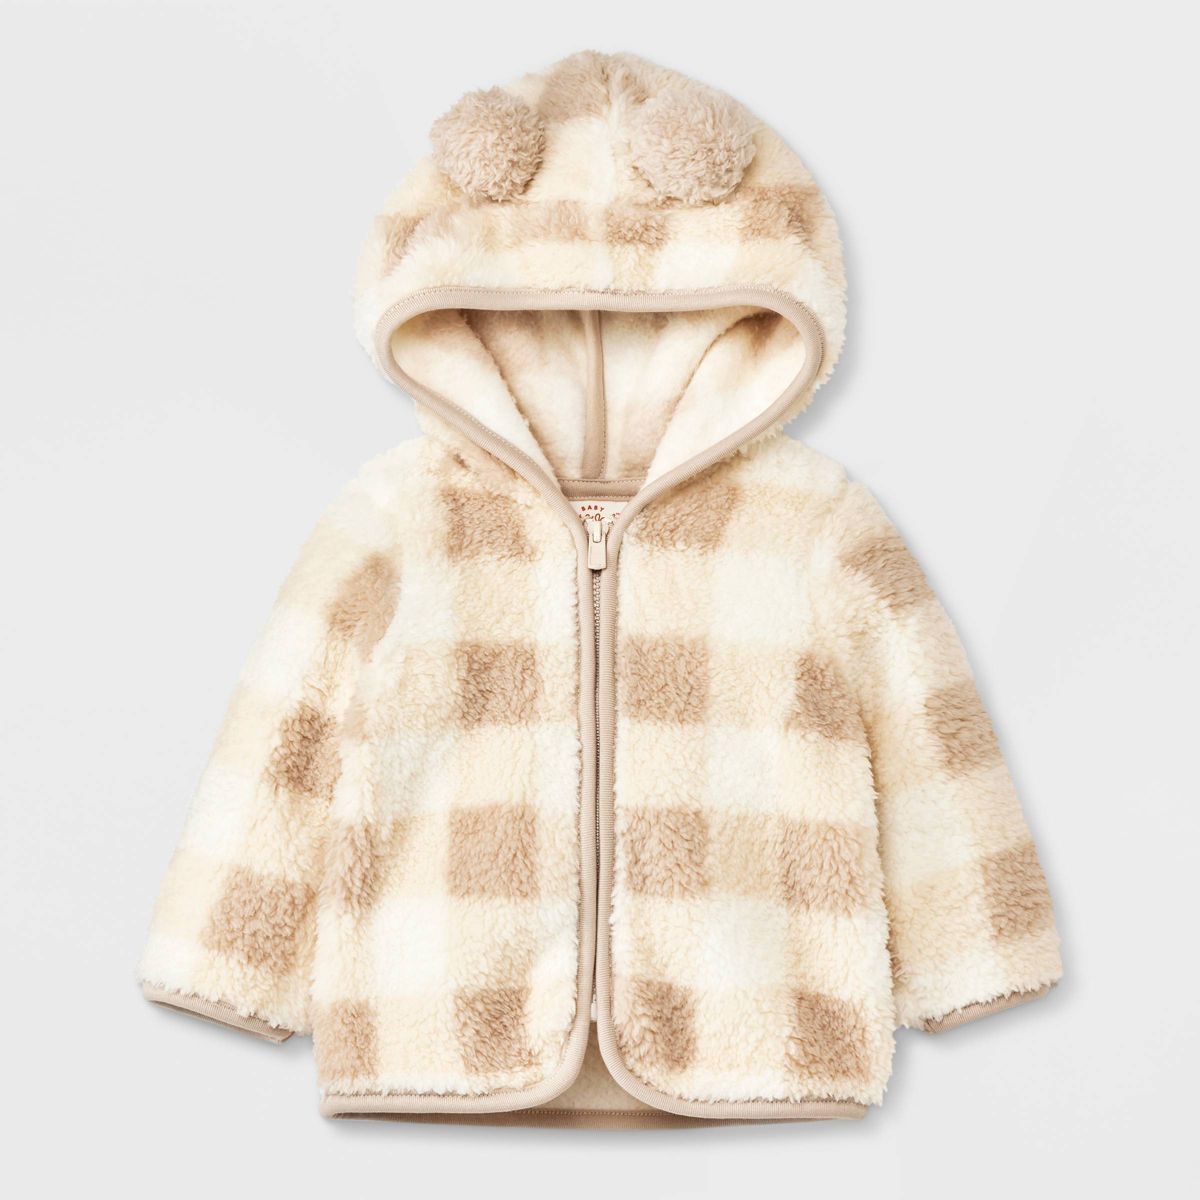 Baby Faux Fur Shearling Jacket - Cat & Jack™ Off-White | Target